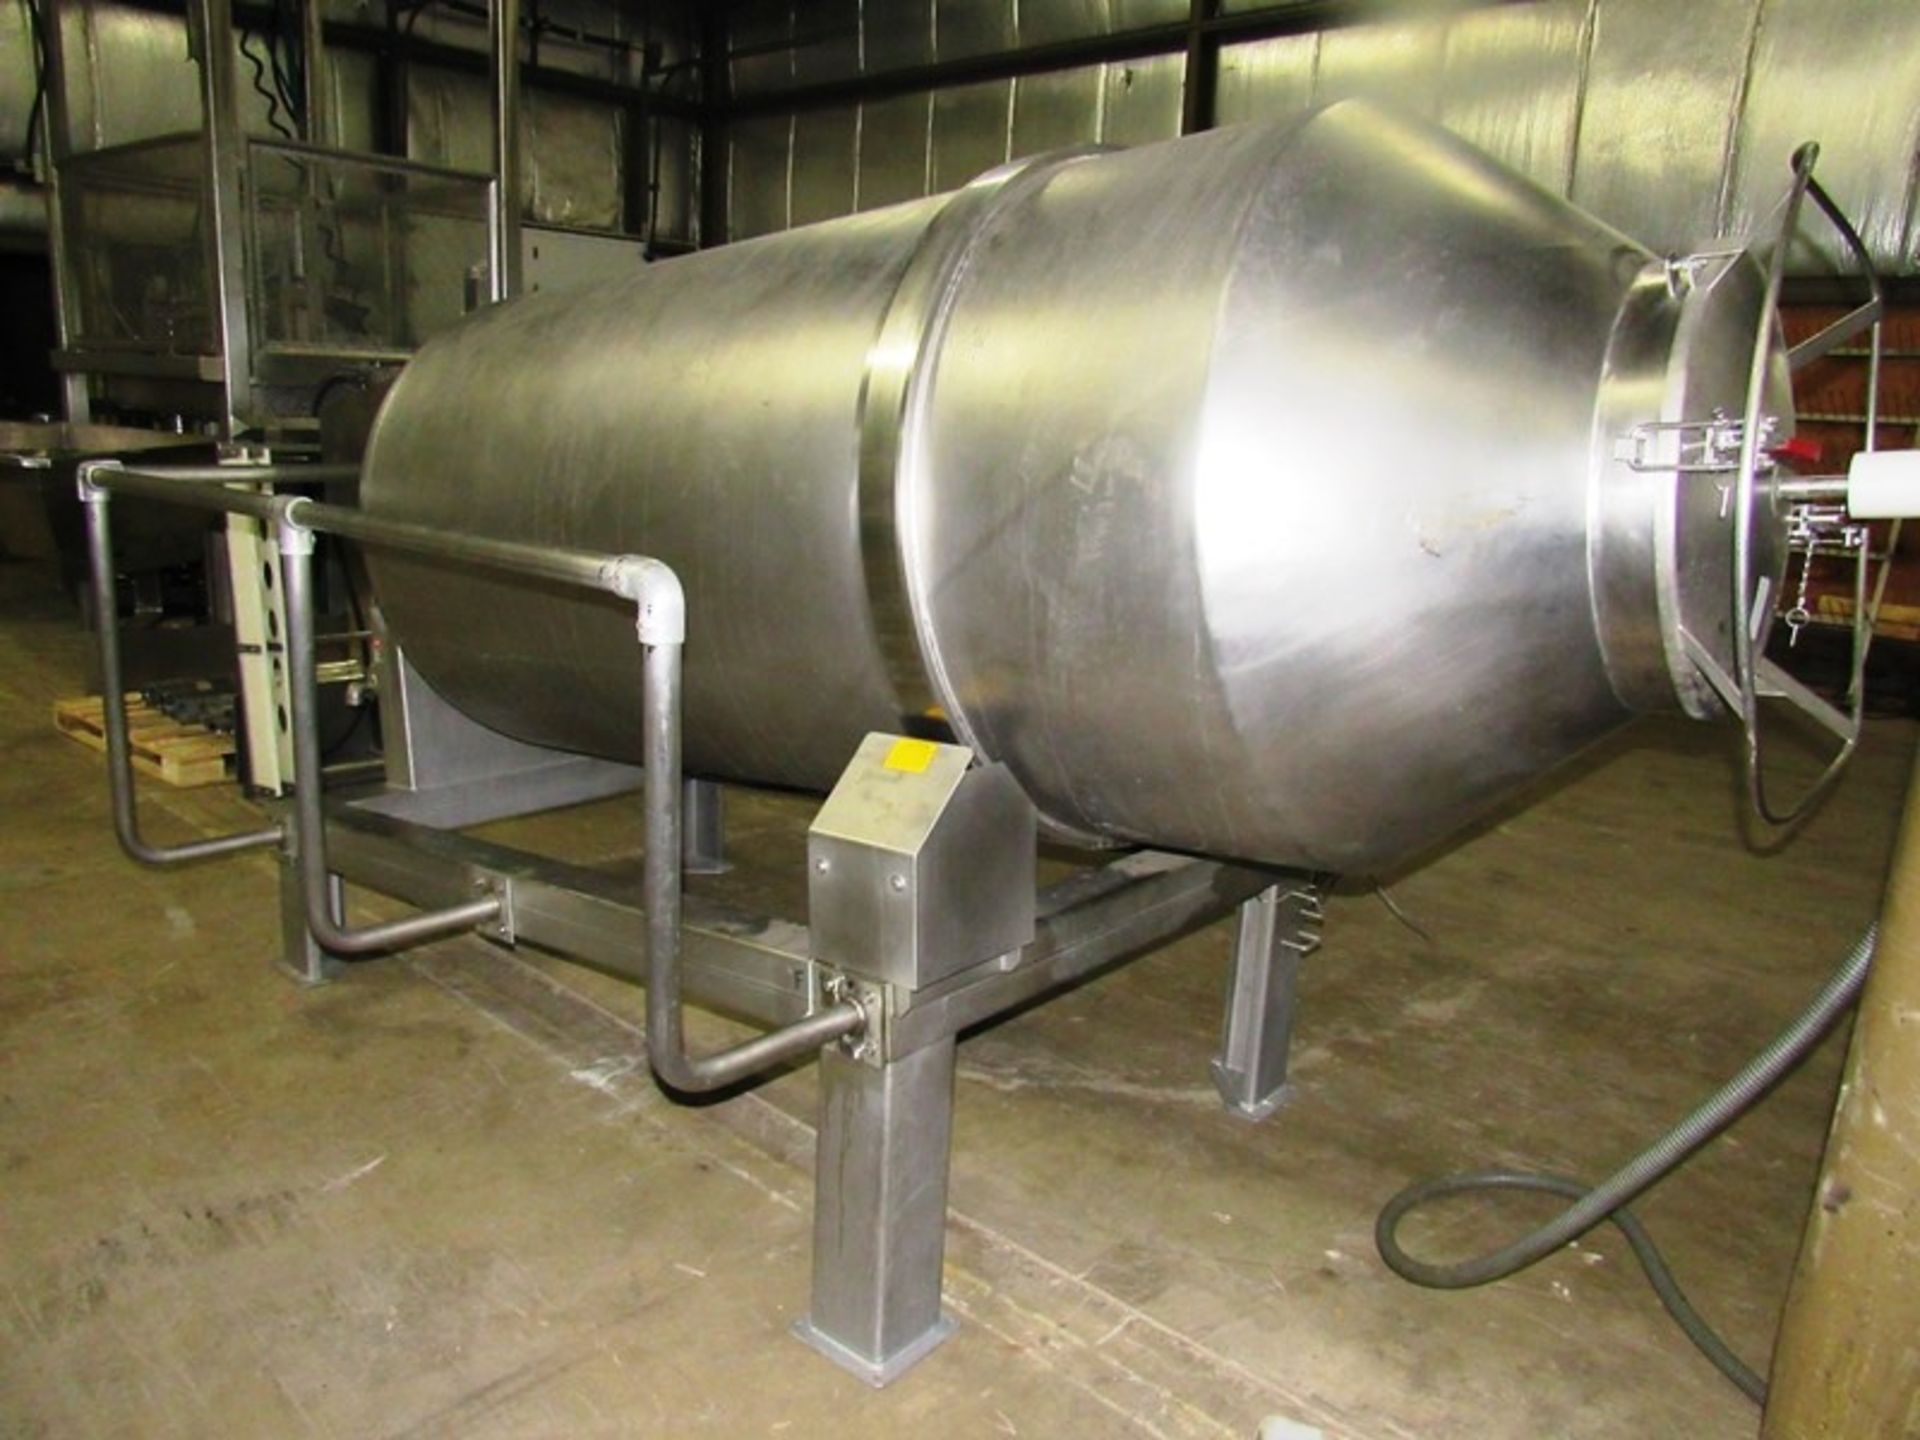 Sipromac Mdl VT2000 S.S. Vacuum Tumbler, 2,000 LB/907Kg, variable speed, reverse rotation for